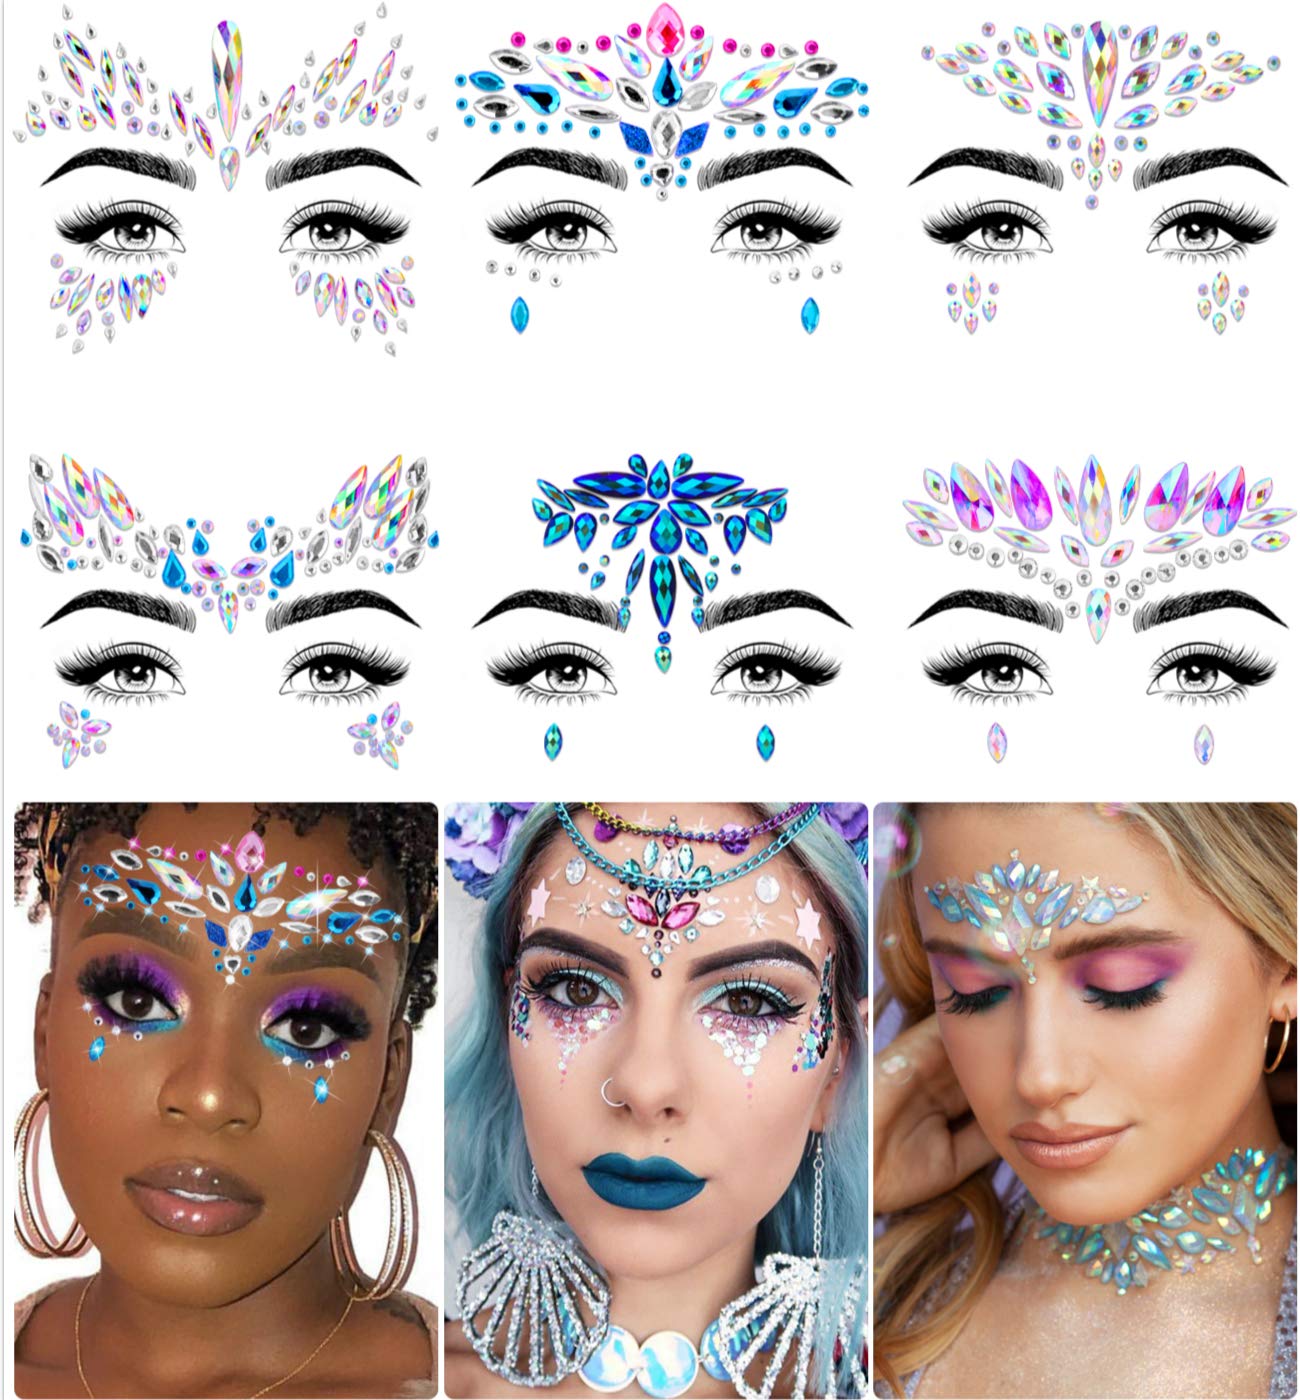 Face Decorations Music Festival Stickers Makeup Art Face Stickers